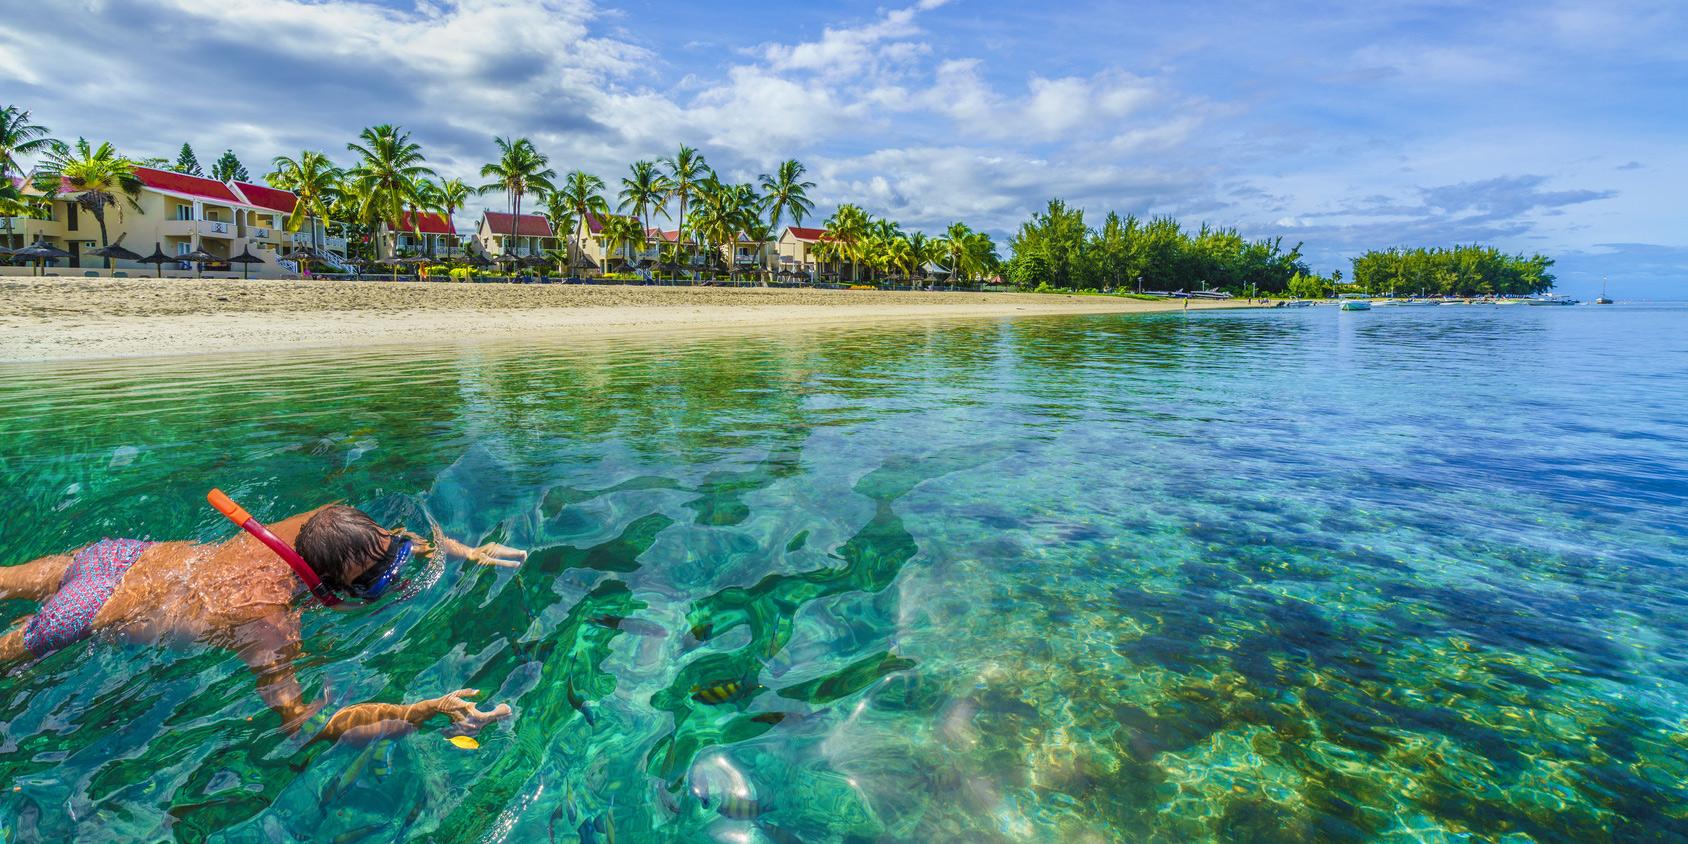 Calm waters in the north and west are well suited to snorkeling.